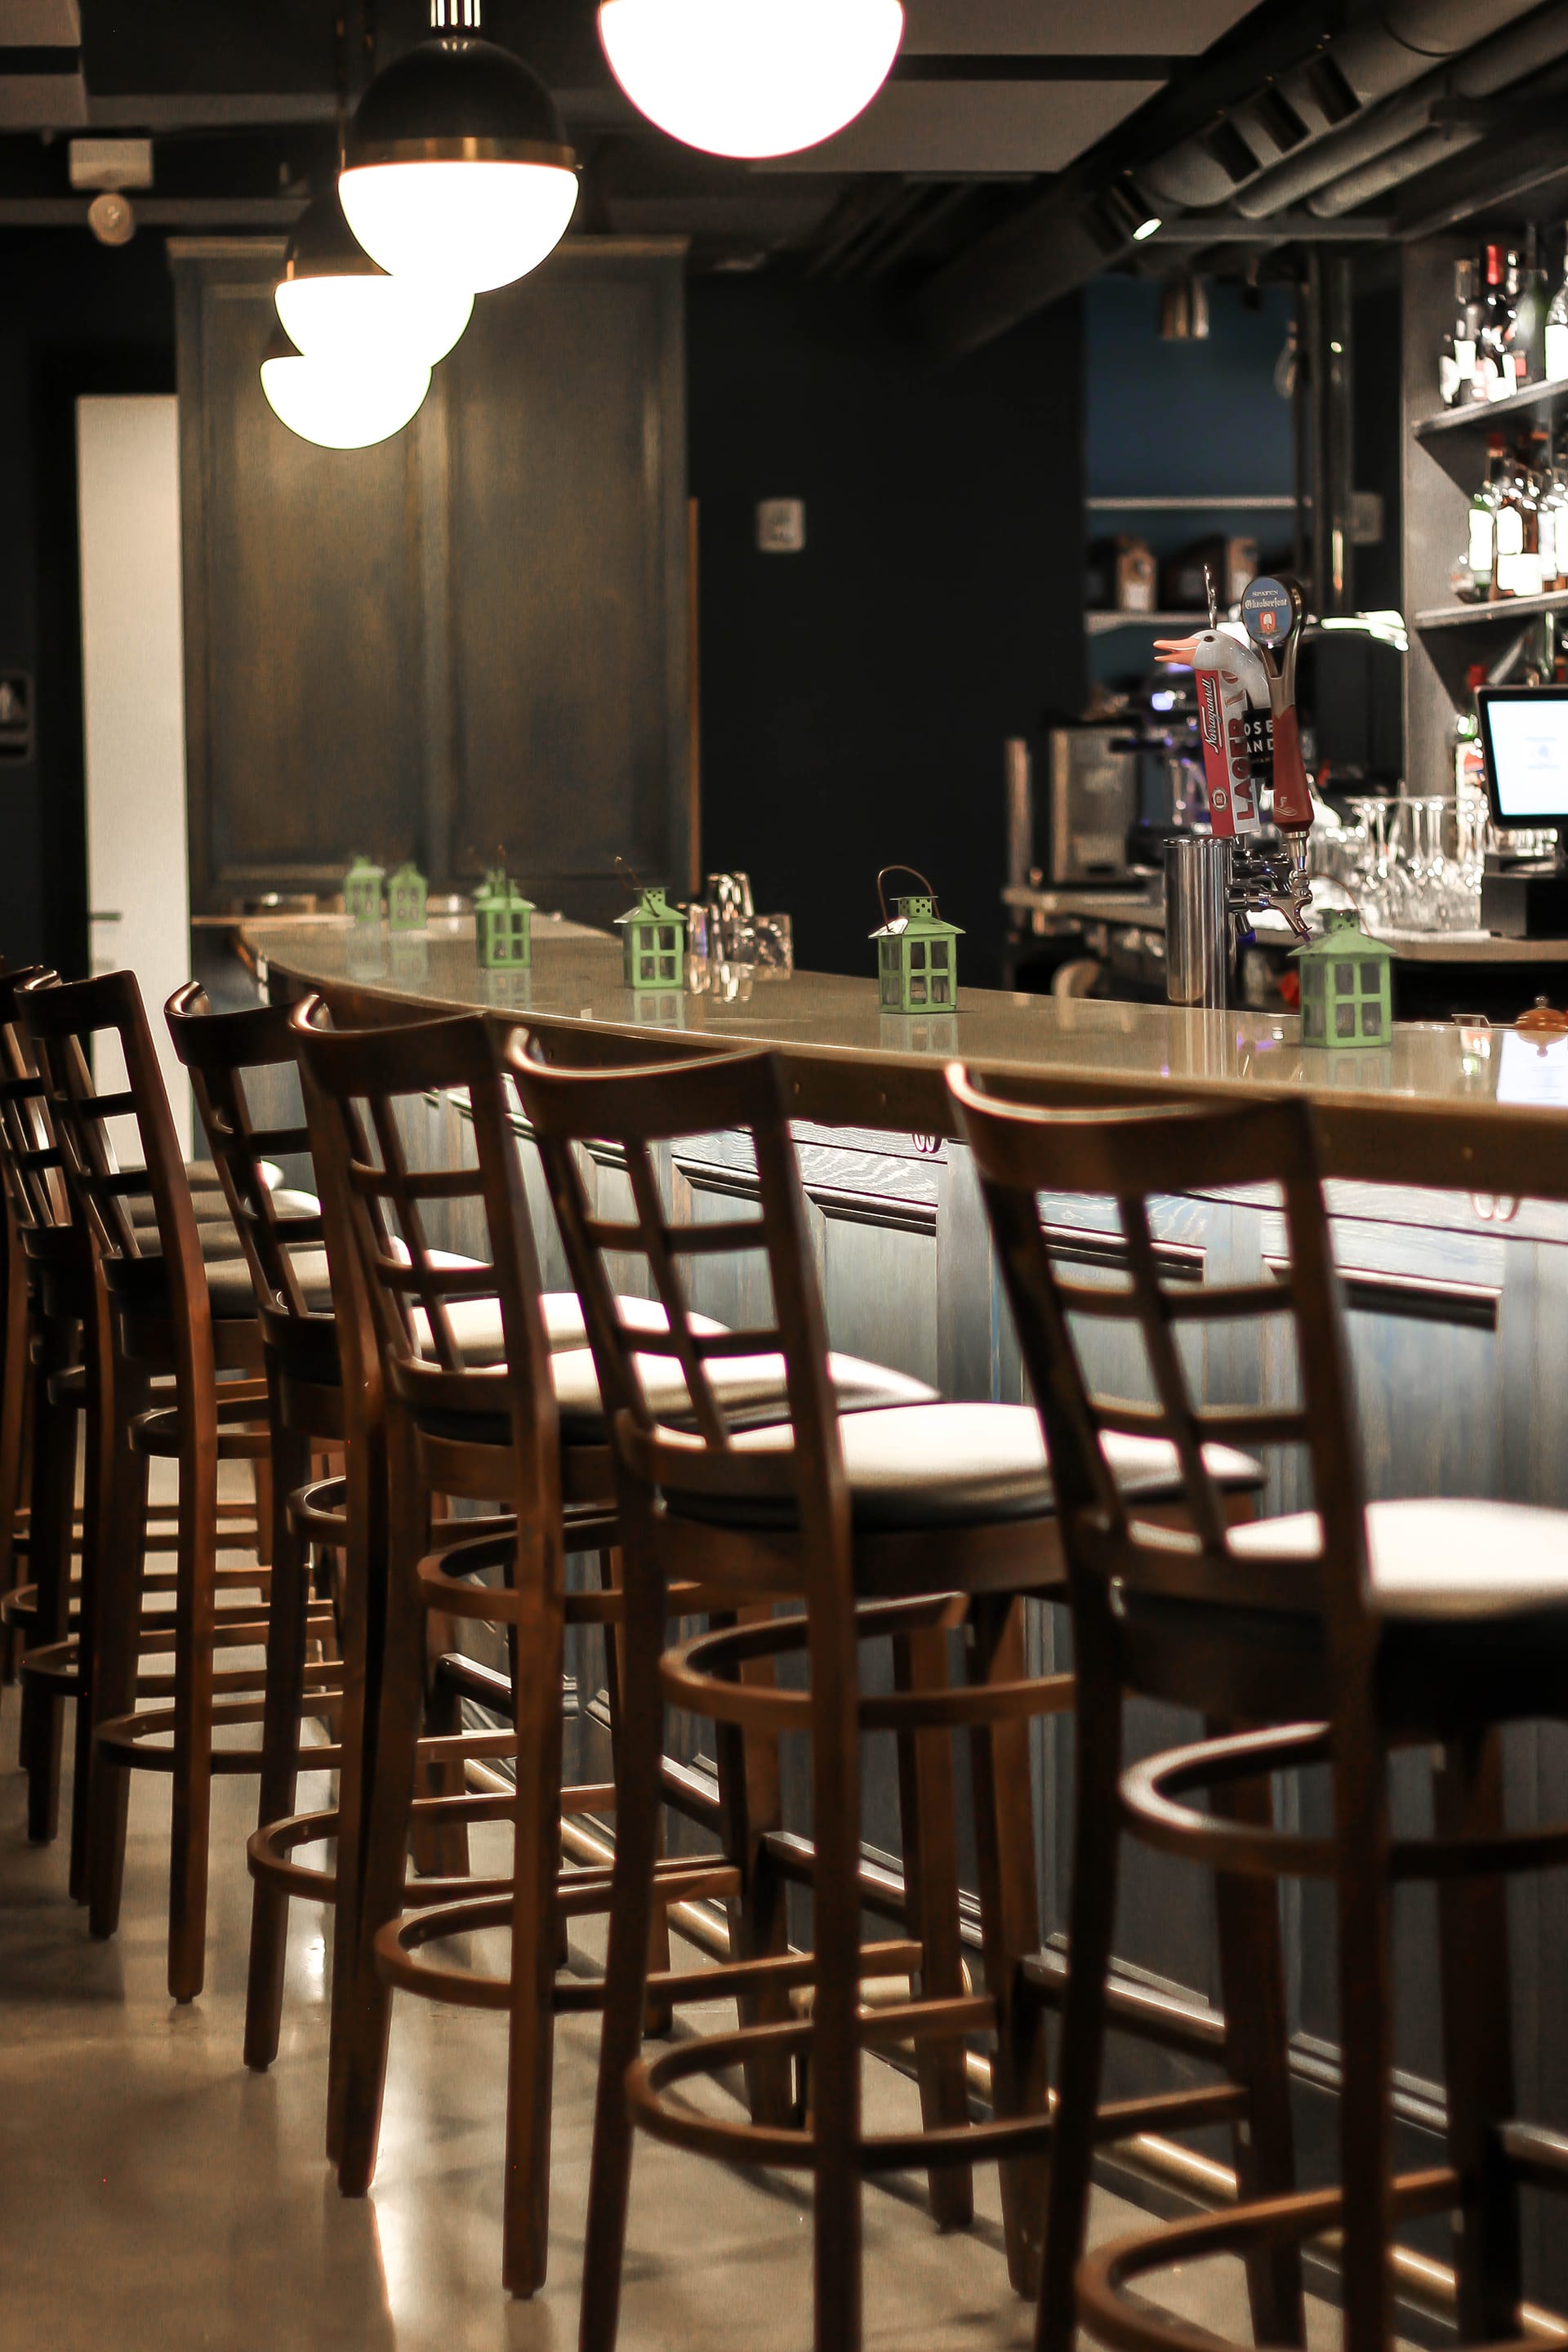 A row of barstools in front of a bar with green lanterns on top and alcove lighting underneath the bar.